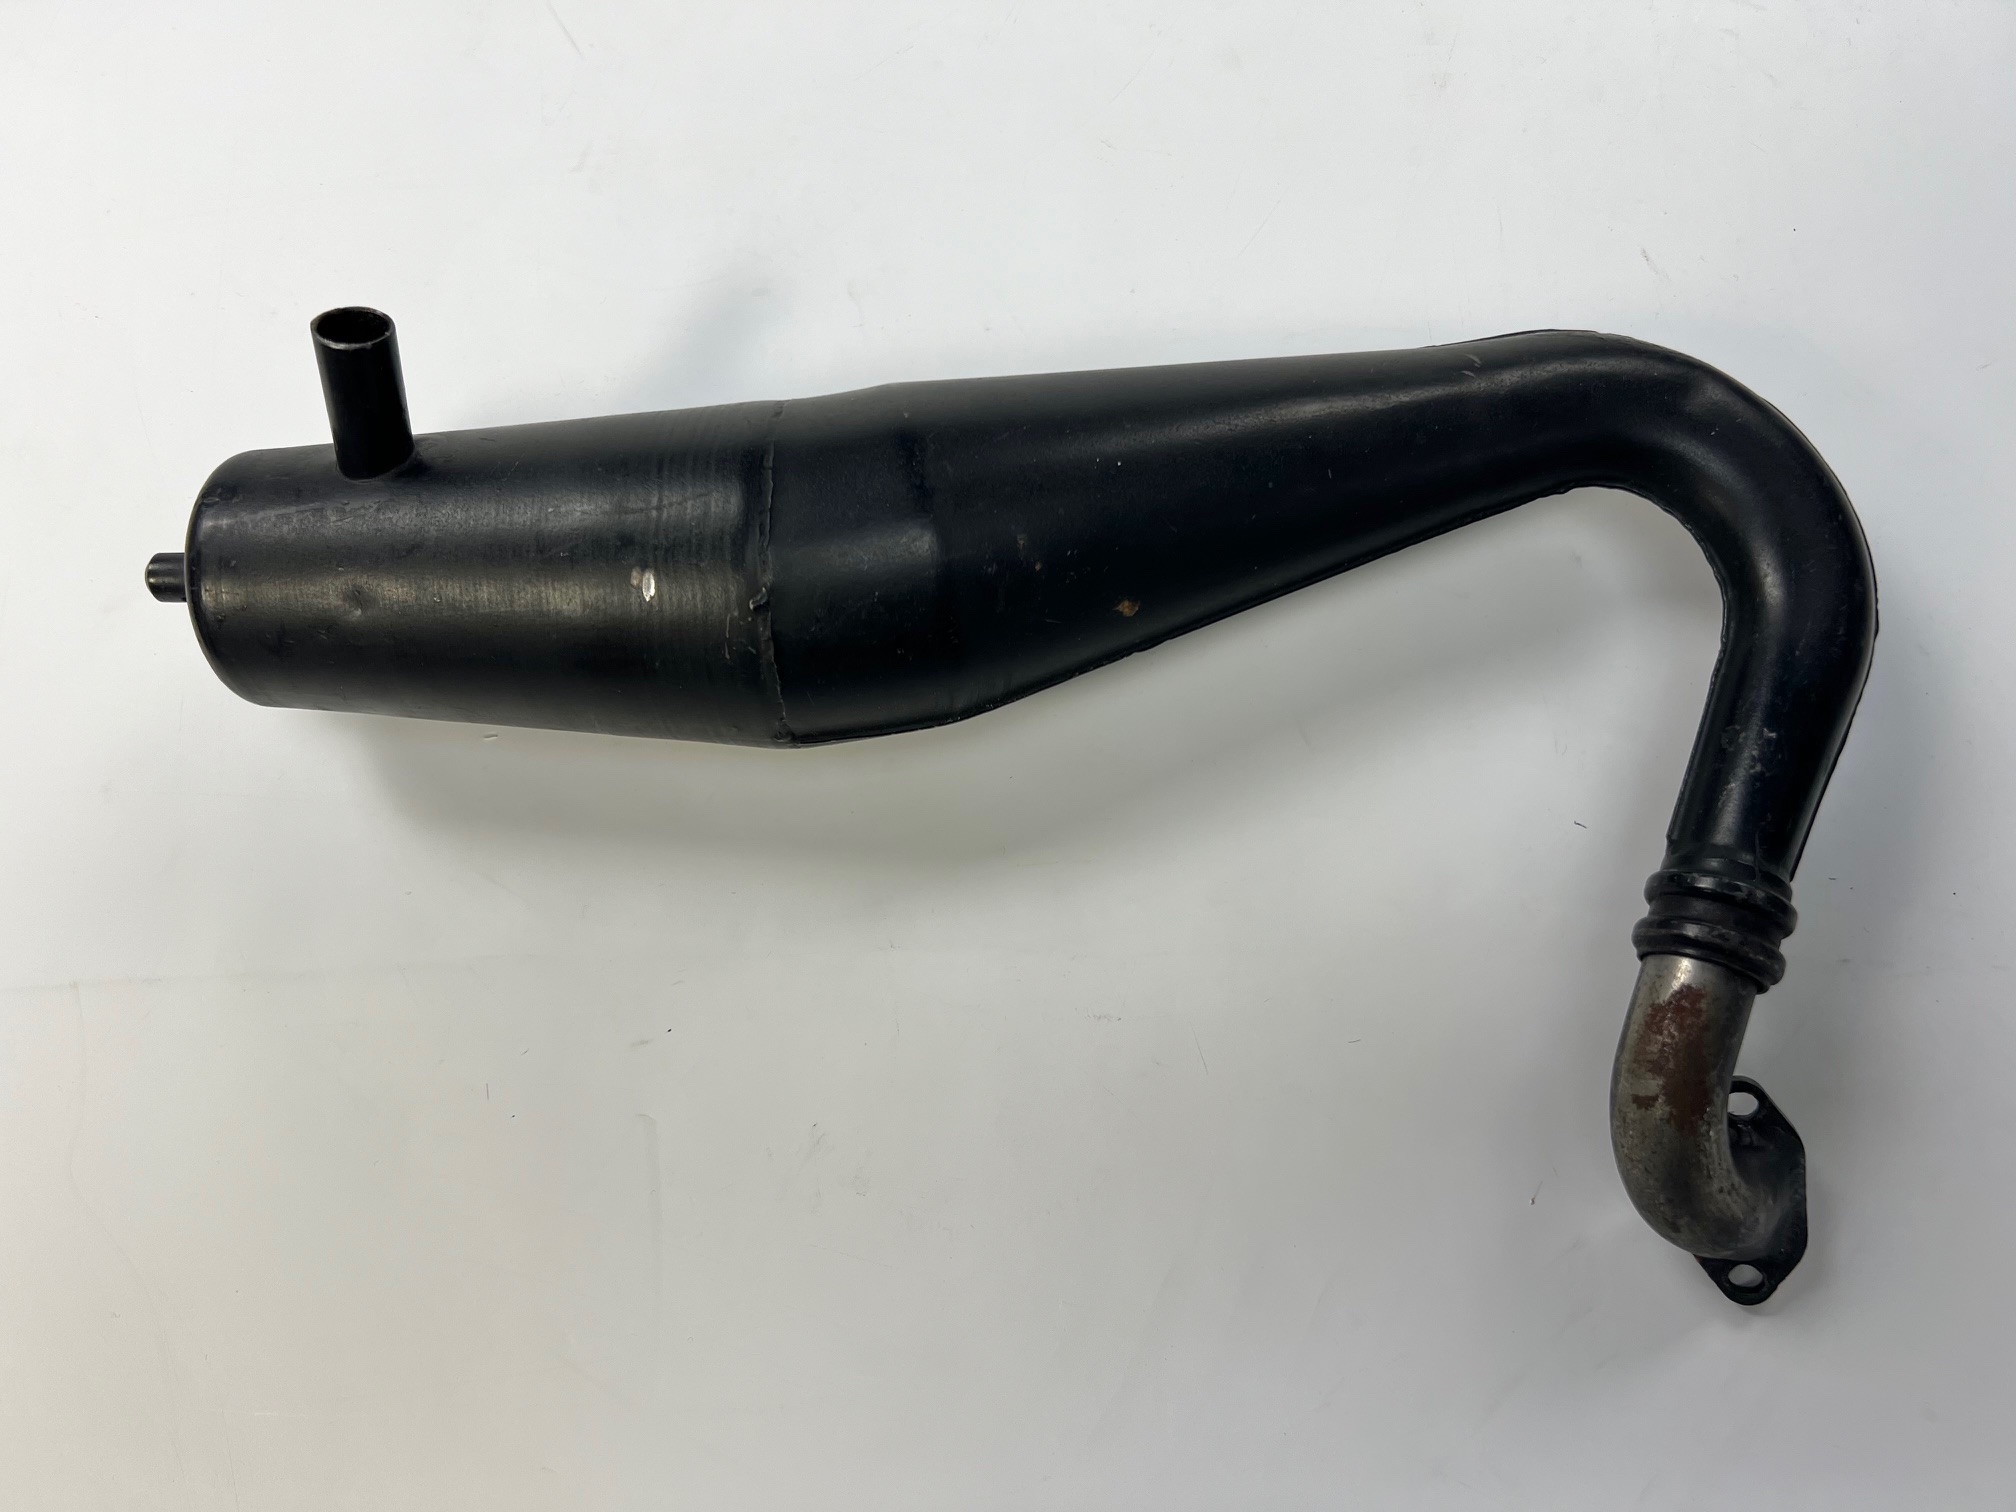 FG Racing pipe system with manifold, used "3"